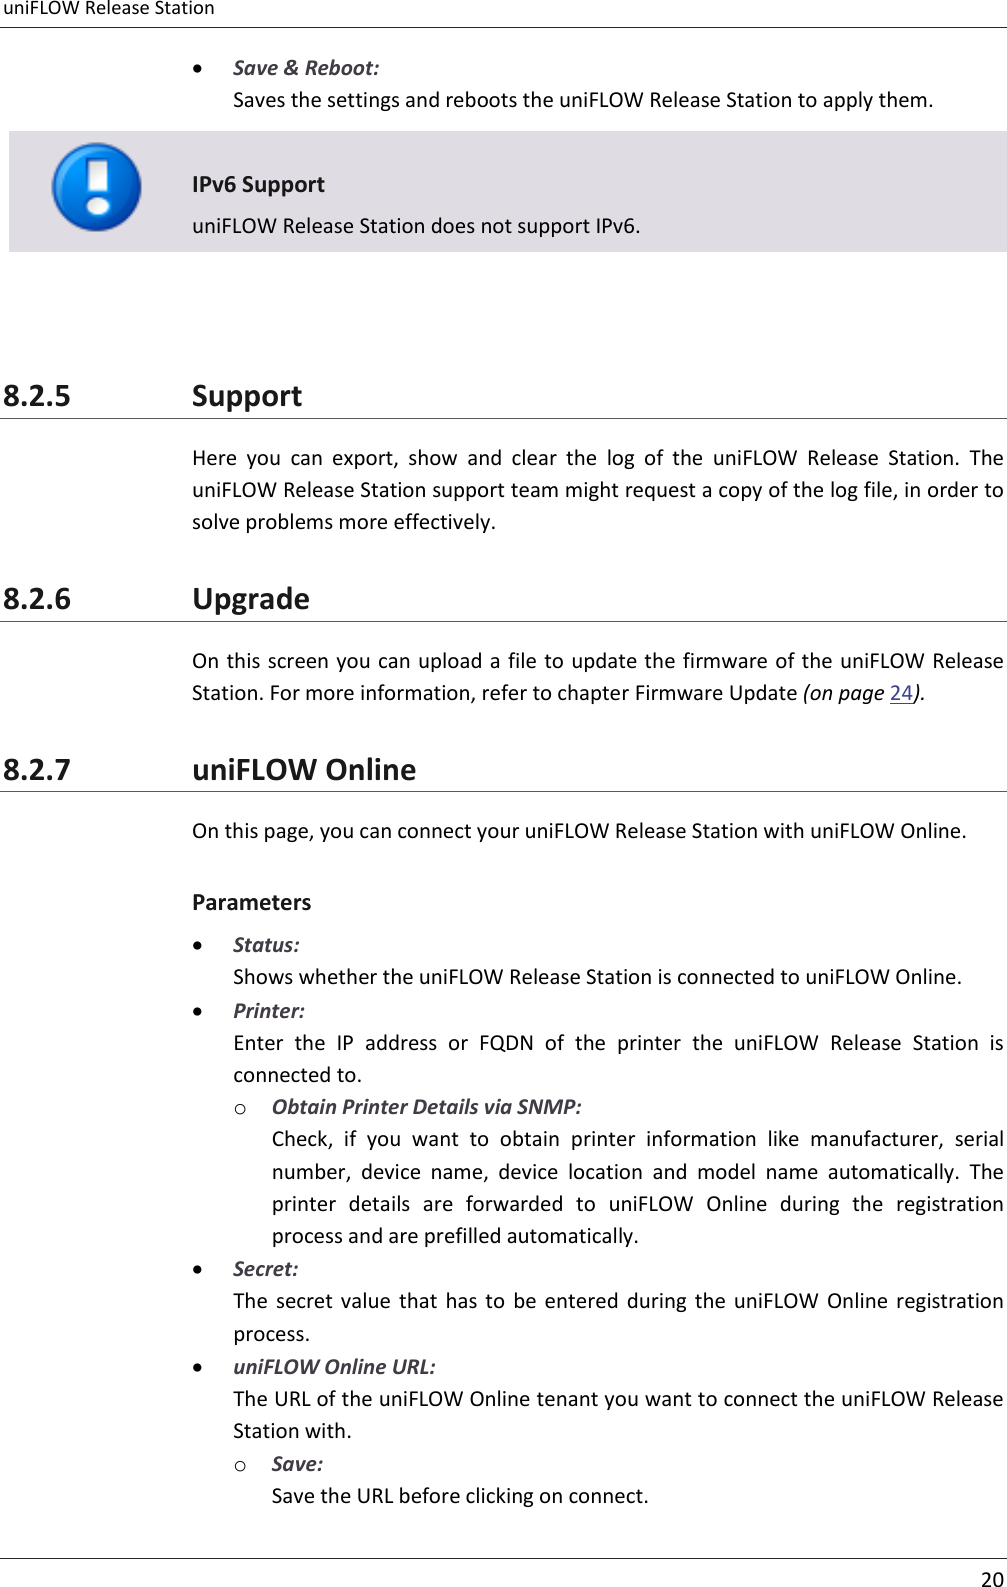 uniFLOW Release Station     20   Save &amp; Reboot: Saves the settings and reboots the uniFLOW Release Station to apply them.   IPv6 Support uniFLOW Release Station does not support IPv6.   8.2.5 Support Here  you  can  export,  show  and  clear  the  log  of  the  uniFLOW  Release  Station.  The uniFLOW Release Station support team might request a copy of the log file, in order to solve problems more effectively. 8.2.6 Upgrade On this screen you can upload a file to update the firmware of the uniFLOW Release Station. For more information, refer to chapter Firmware Update (on page 24). 8.2.7 uniFLOW Online On this page, you can connect your uniFLOW Release Station with uniFLOW Online. Parameters  Status: Shows whether the uniFLOW Release Station is connected to uniFLOW Online.  Printer: Enter  the  IP  address  or  FQDN  of  the  printer  the  uniFLOW  Release  Station  is connected to. o Obtain Printer Details via SNMP: Check,  if  you  want  to  obtain  printer  information  like  manufacturer,  serial number,  device  name,  device  location  and  model  name  automatically.  The printer  details  are  forwarded  to  uniFLOW  Online  during  the  registration process and are prefilled automatically.  Secret: The  secret value  that  has  to  be  entered  during  the  uniFLOW  Online  registration process.  uniFLOW Online URL: The URL of the uniFLOW Online tenant you want to connect the uniFLOW Release Station with. o Save: Save the URL before clicking on connect. 